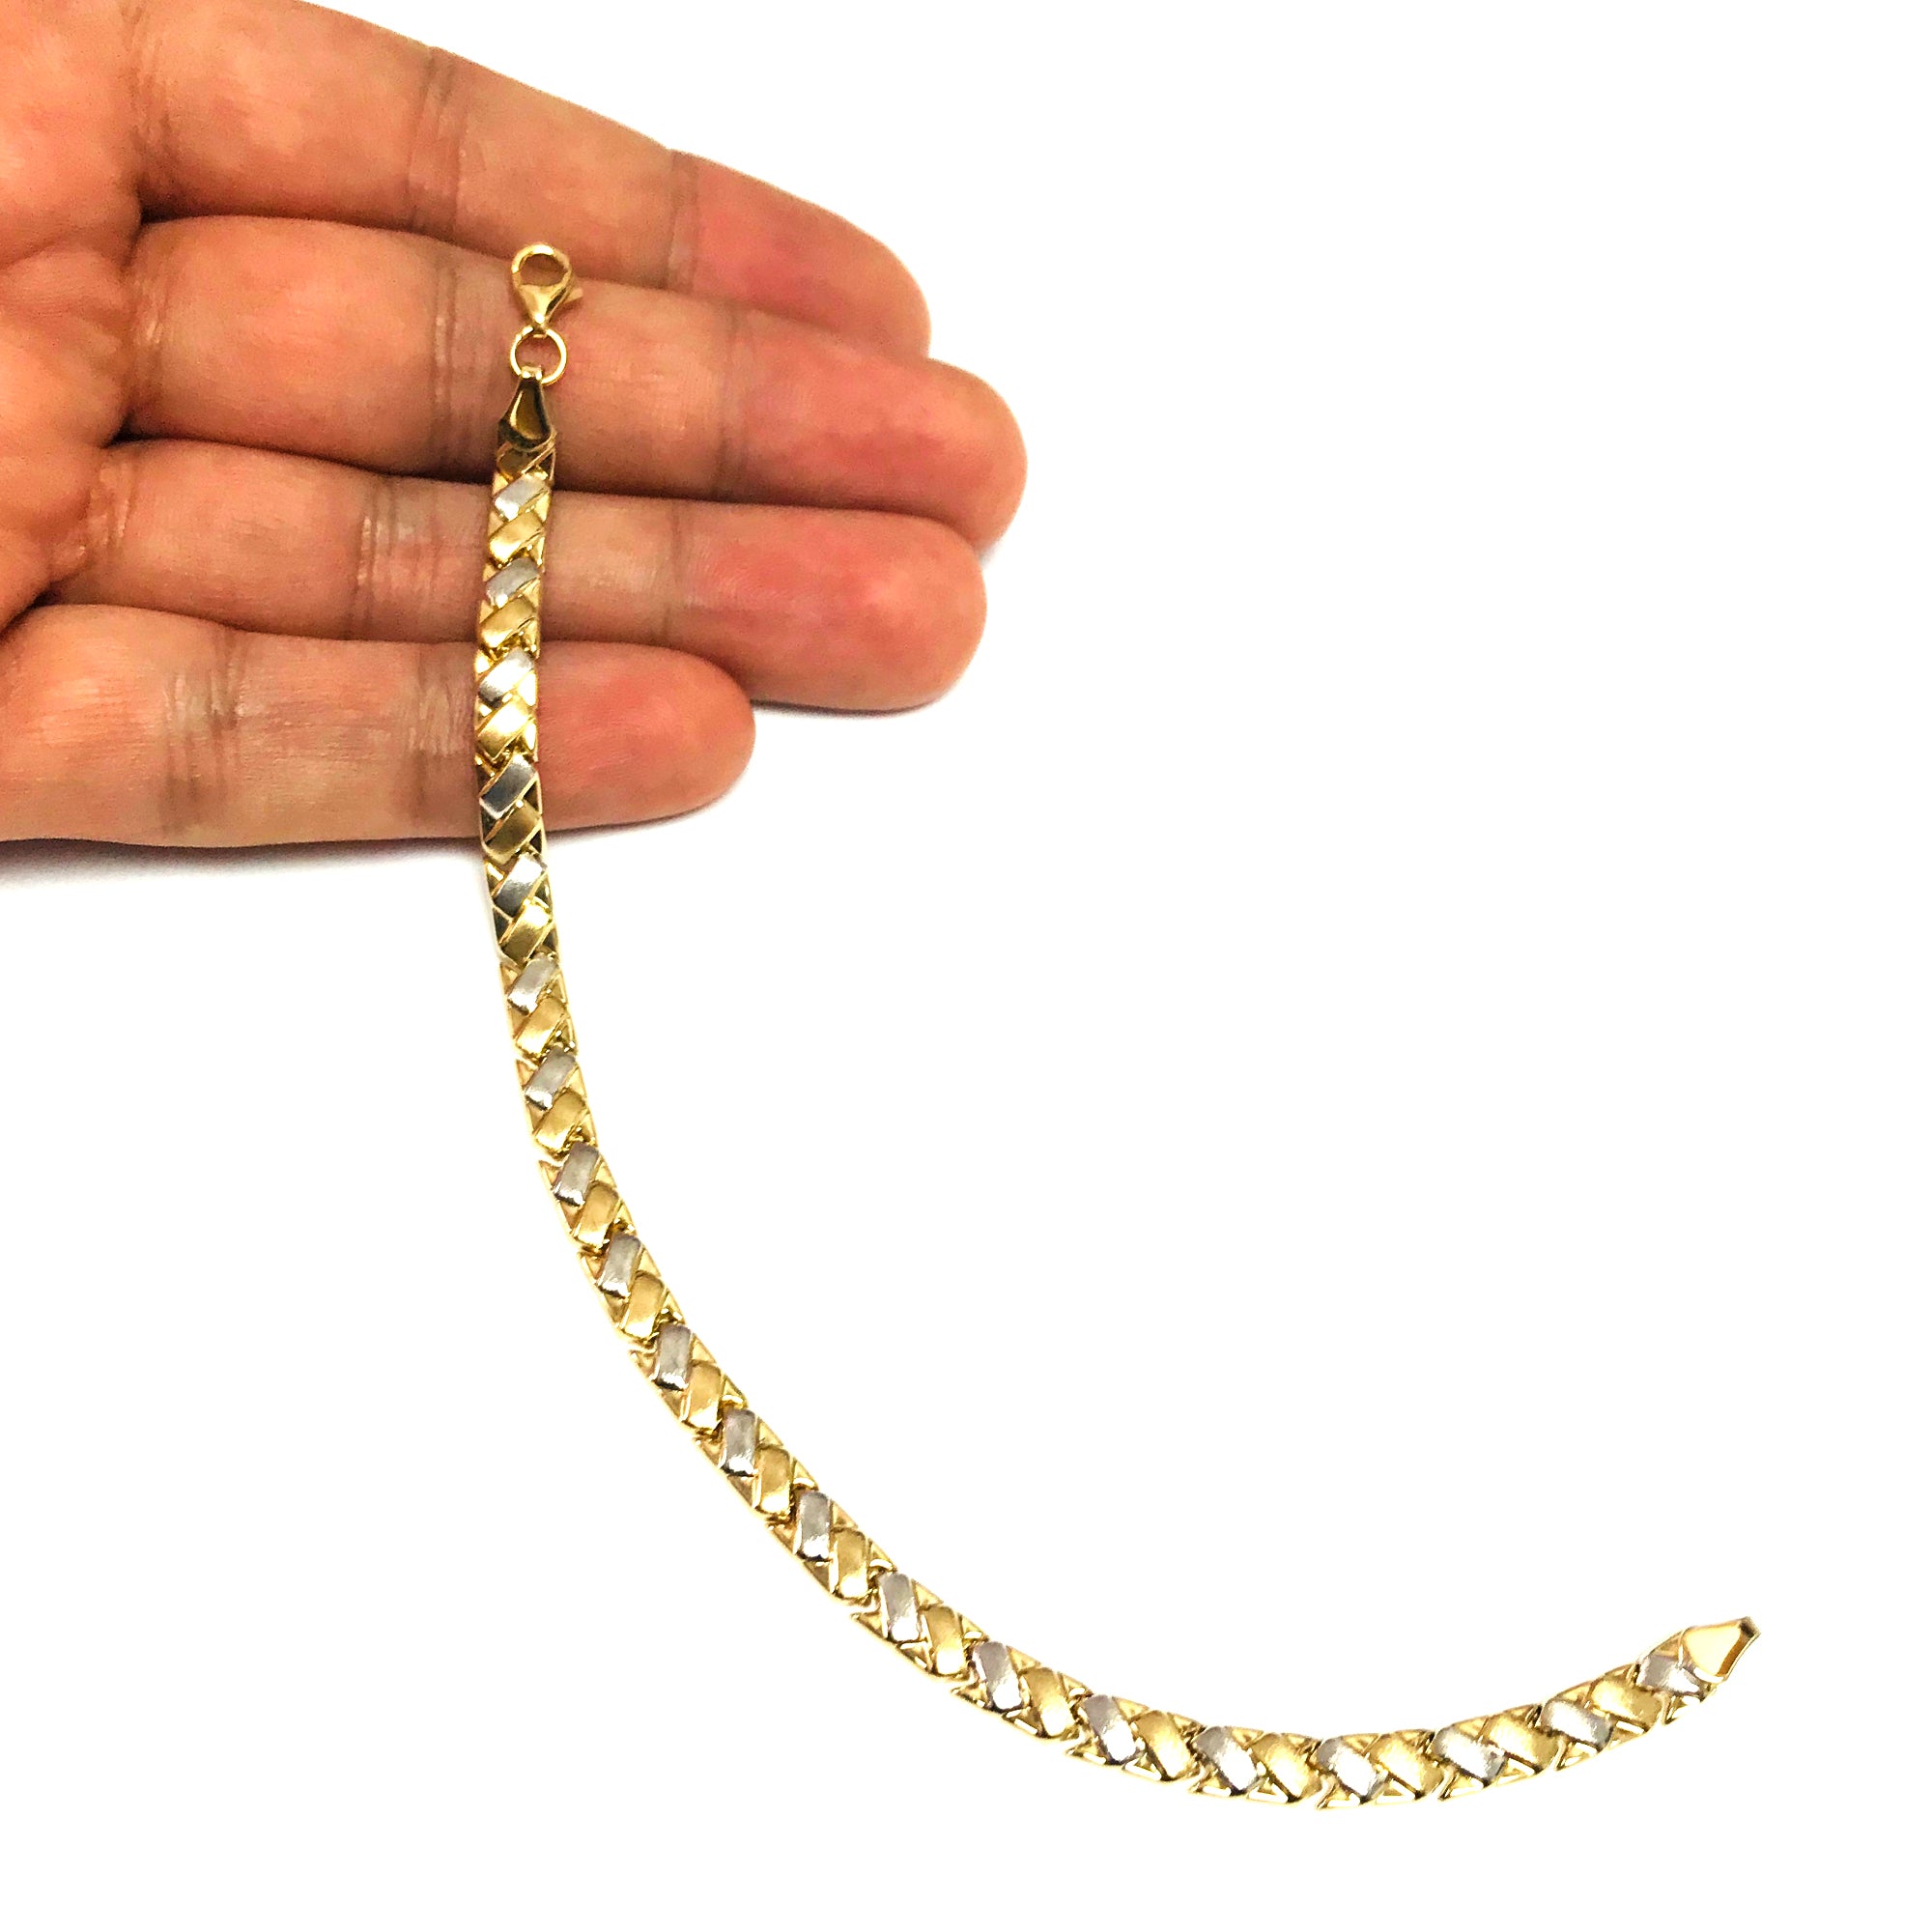 14k Yellow And White Gold Weaved Links Bracelet, 7,25" fine designer jewelry for men and women